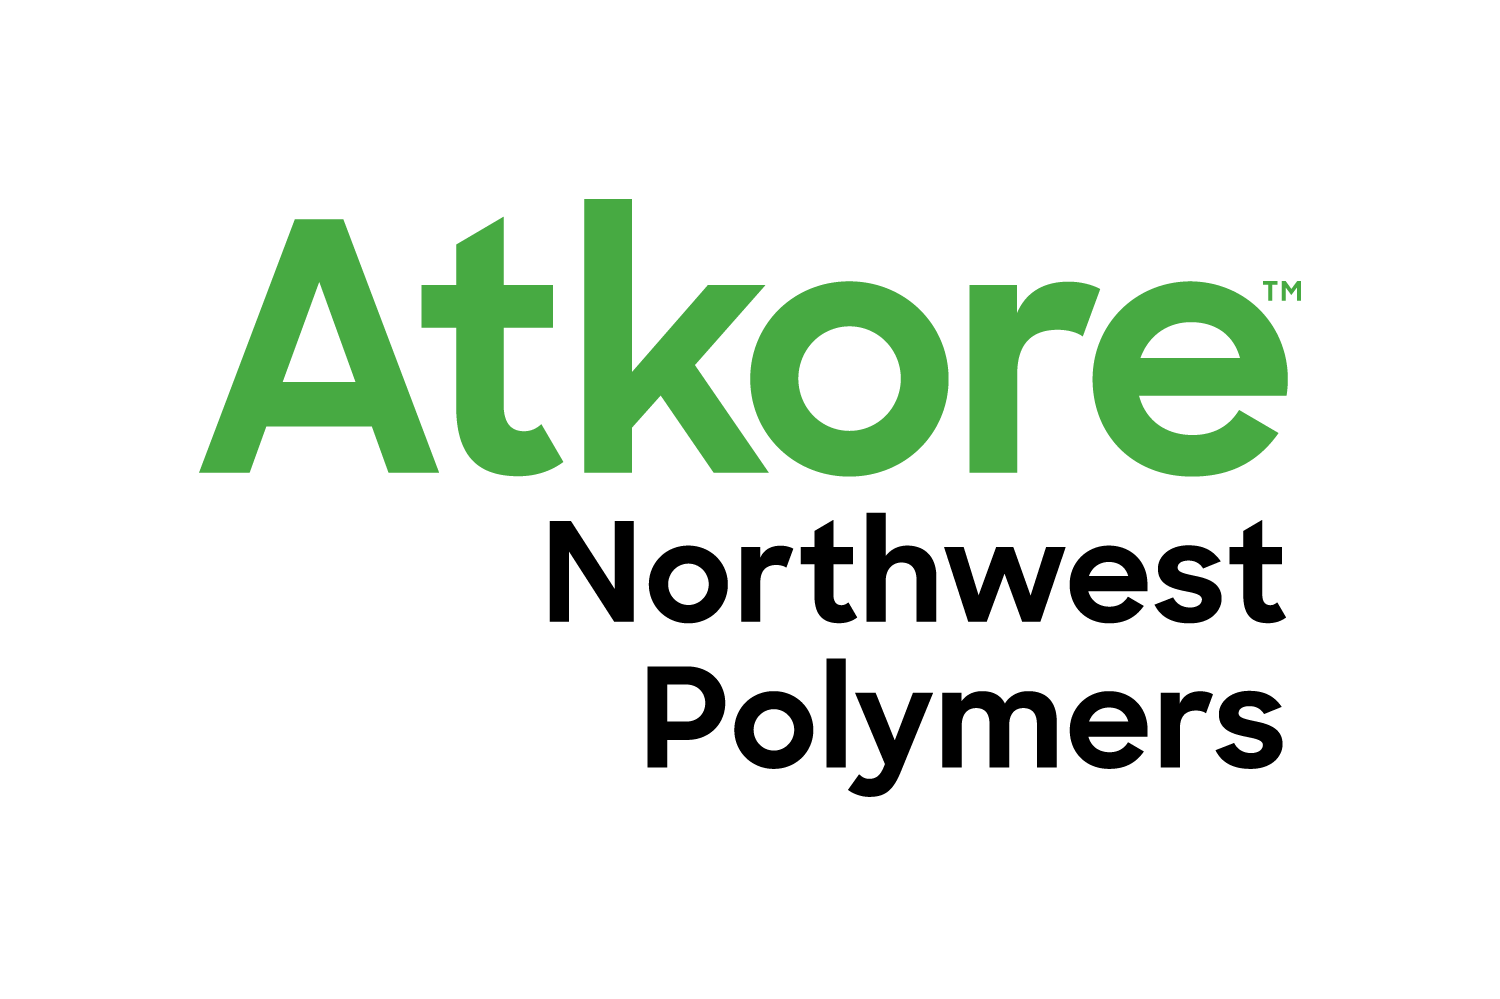 ATK-24194_Northwest_Polymers_Brand_Logo_SubBrand_NWP_RGB_Color.png